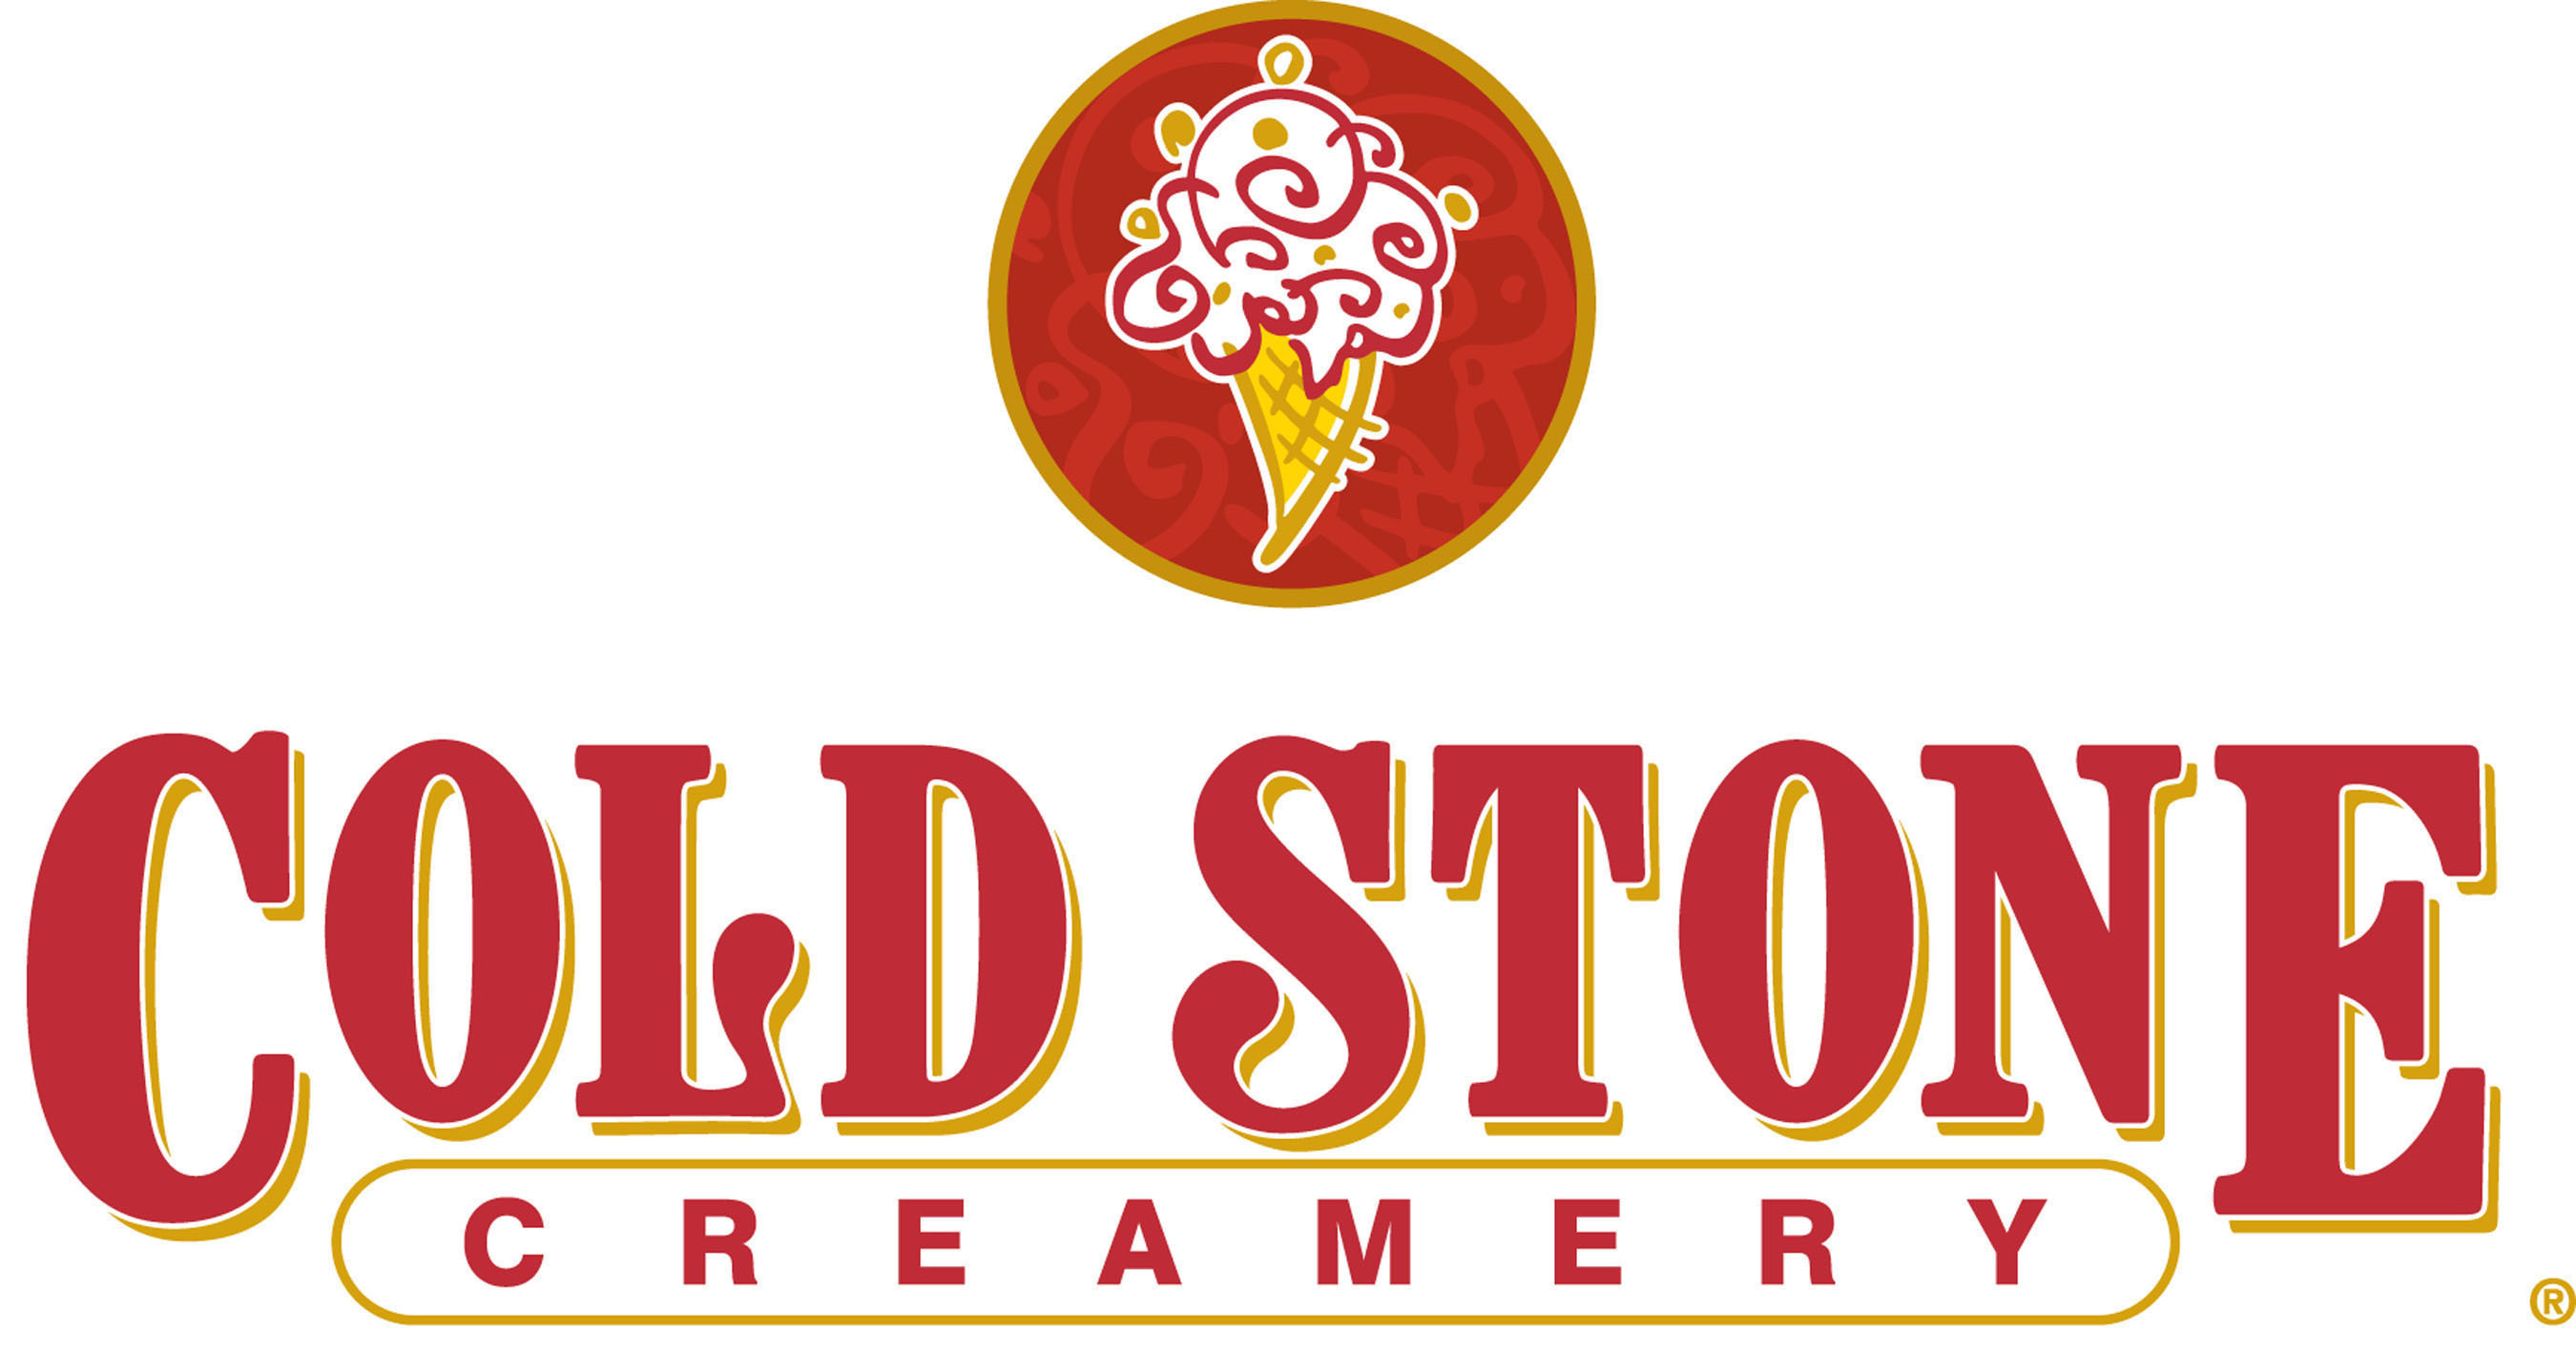 Cold Stone Creamery delivers The Ultimate Ice Cream Experience(r) through a community of franchisees who are passionate about ice cream. The secret recipe for smooth and creamy ice cream is handcrafted fresh daily in each store, and then customized by combining a variety of mix-ins on a frozen granite stone. Headquartered in Scottsdale, Ariz., Cold Stone Creamery is a subsidiary of Kahala, one of the fastest growing franchising companies in the world, with a portfolio of 15 quick-service restaurant brands. Cold Stone Creamery operates more than 1,500 locations in 20 countries. For more information about Cold Stone Creamery, visit www.coldstonecreamery.com